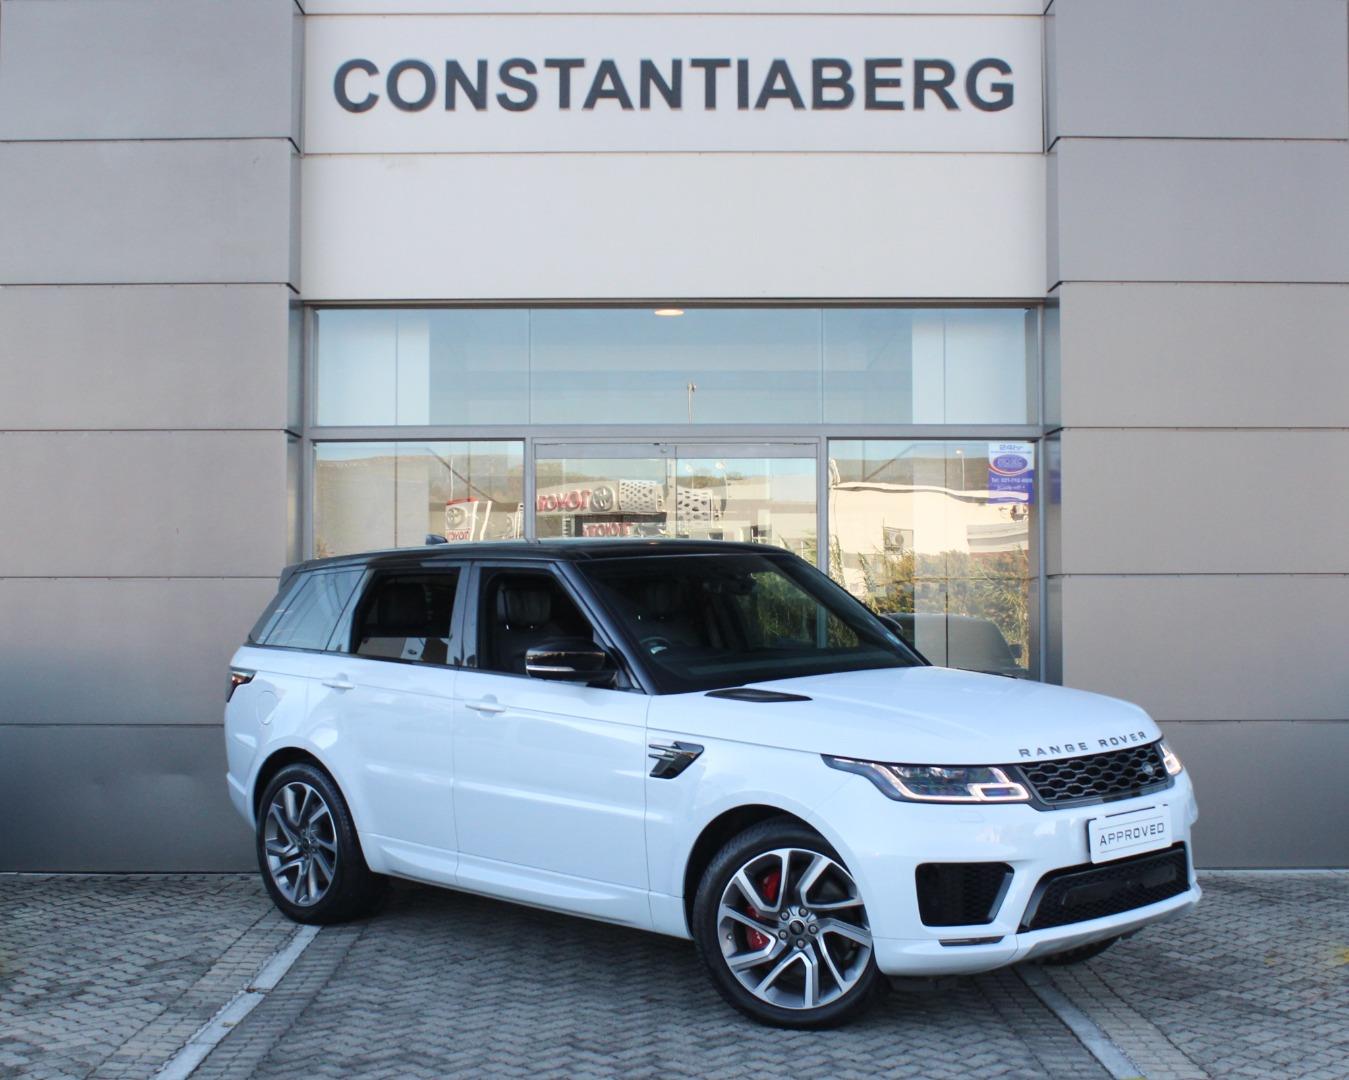 2020 Land Rover Range Rover Sport  for sale - 966898